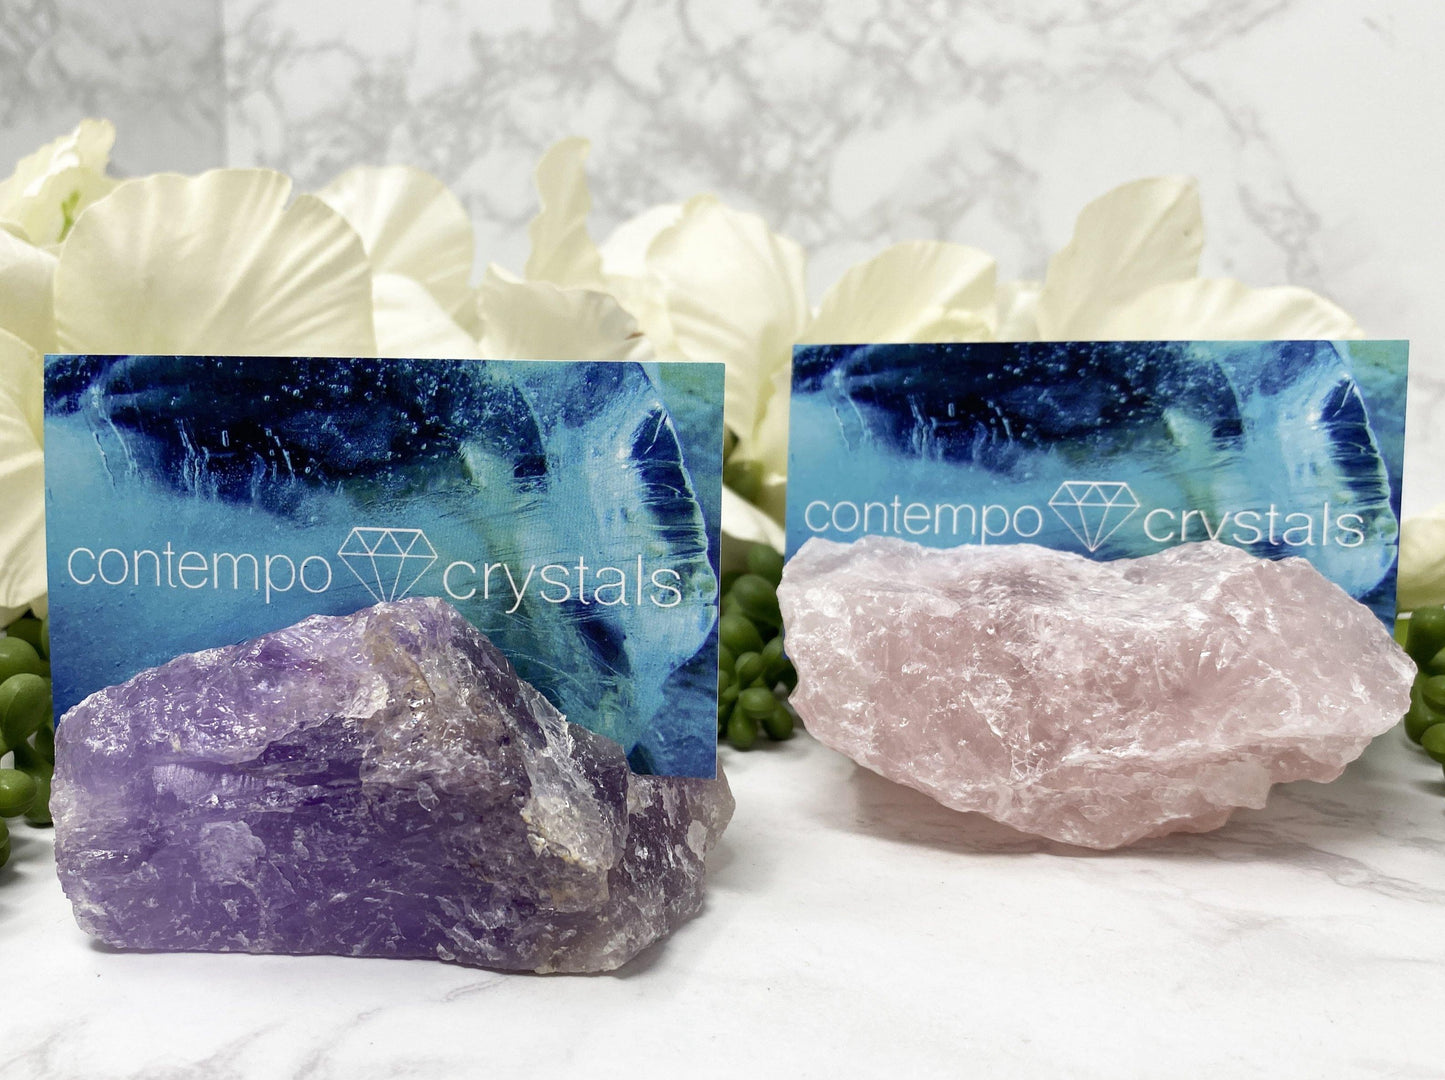 Crystal Business Card Holders from Contempo Crystals